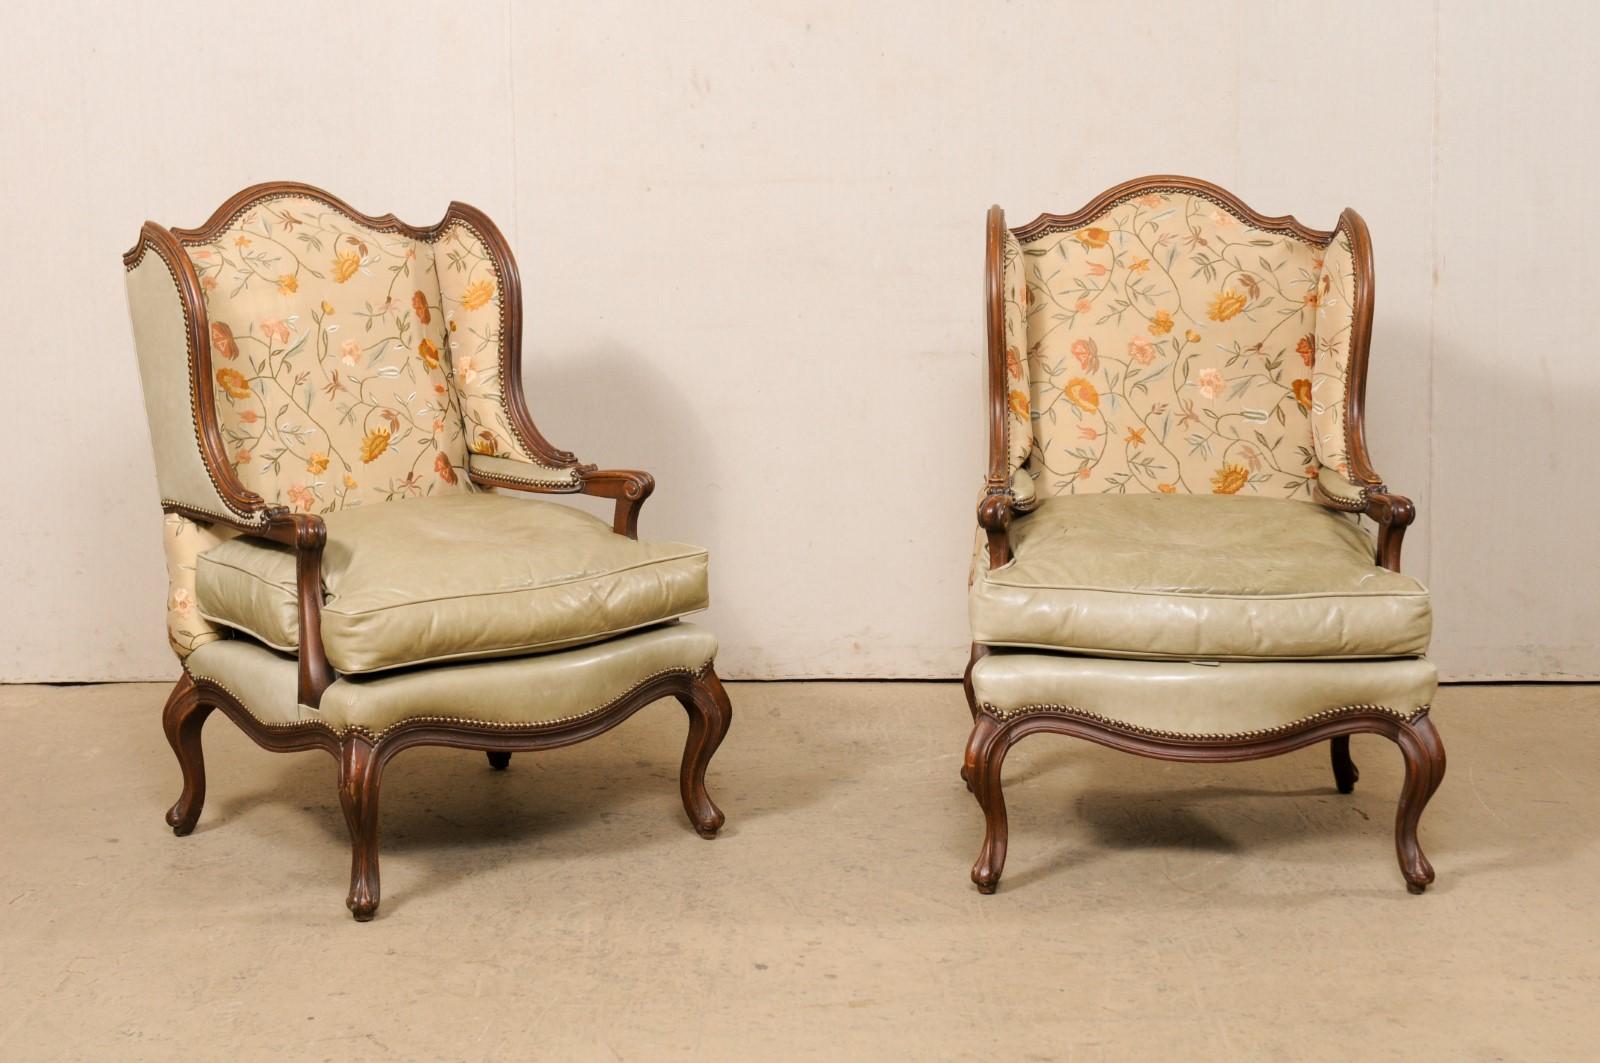 A pair of French style winged-back carved-wood and upholstered armchairs from the mid 20th century. This vintage pair of bergère chairs from America have been created in the beautiful styling inspired by the French with each featuring winged-backs